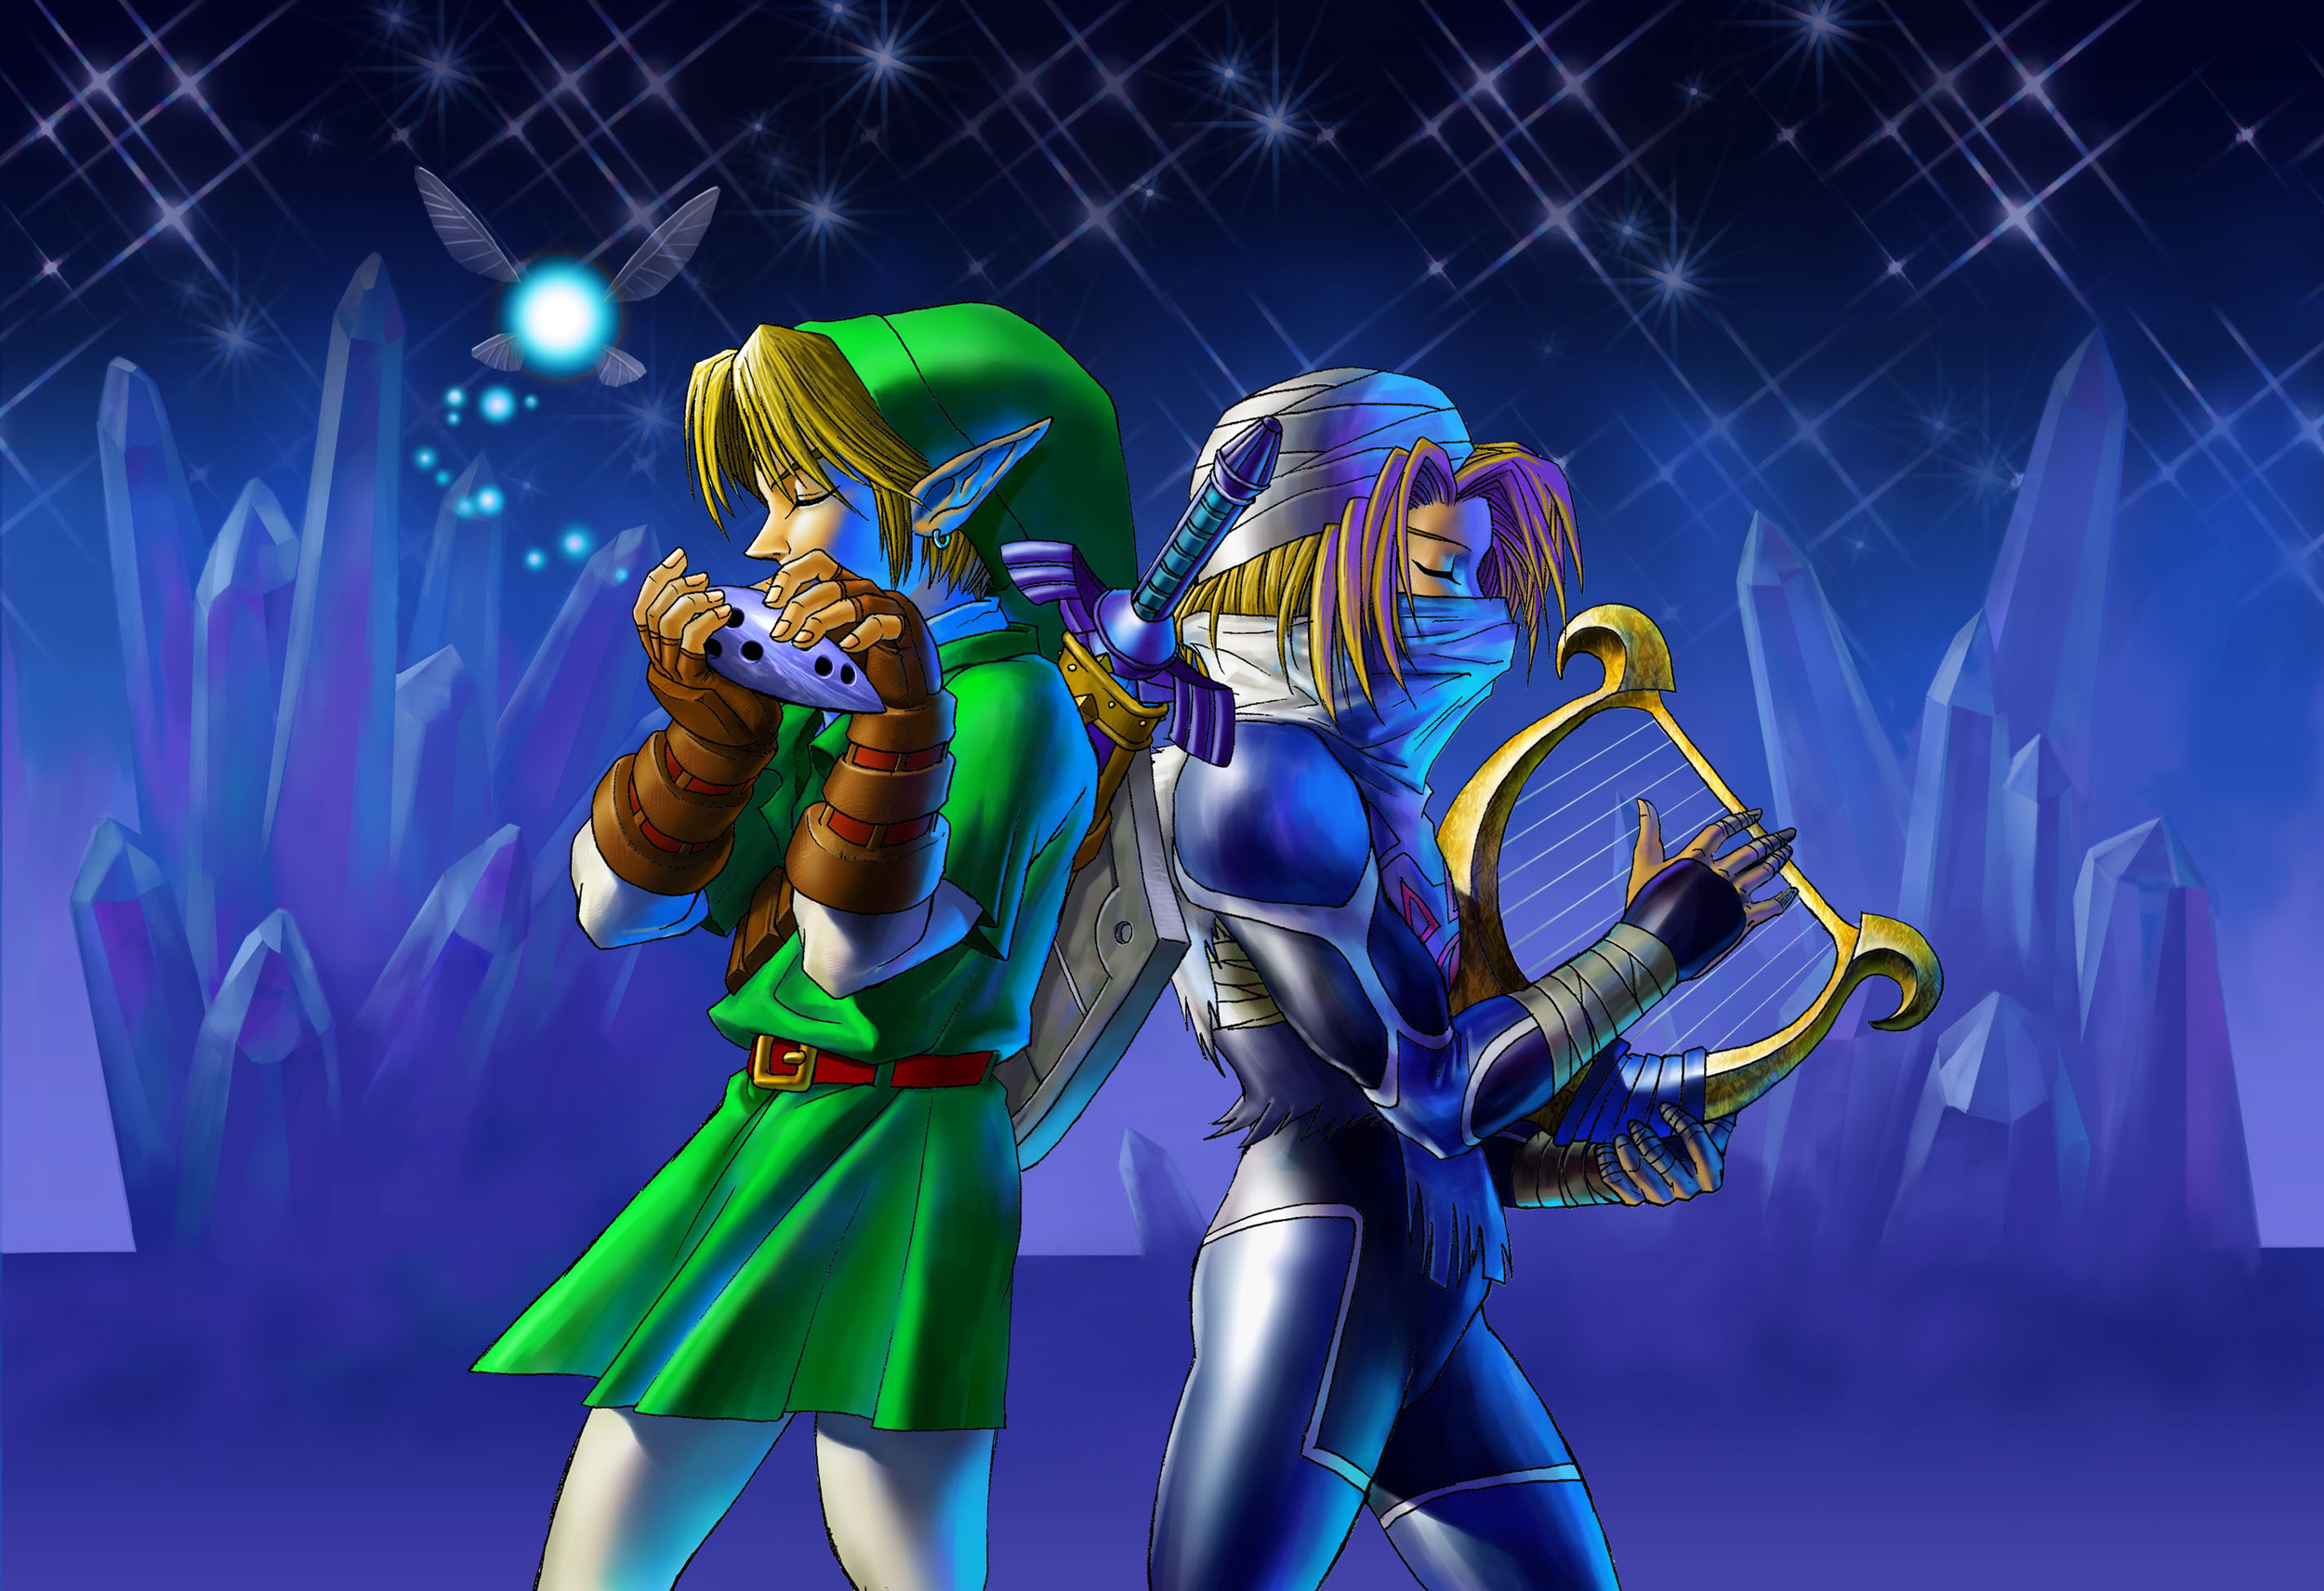 Beta Character Designs of Ocarina of Time